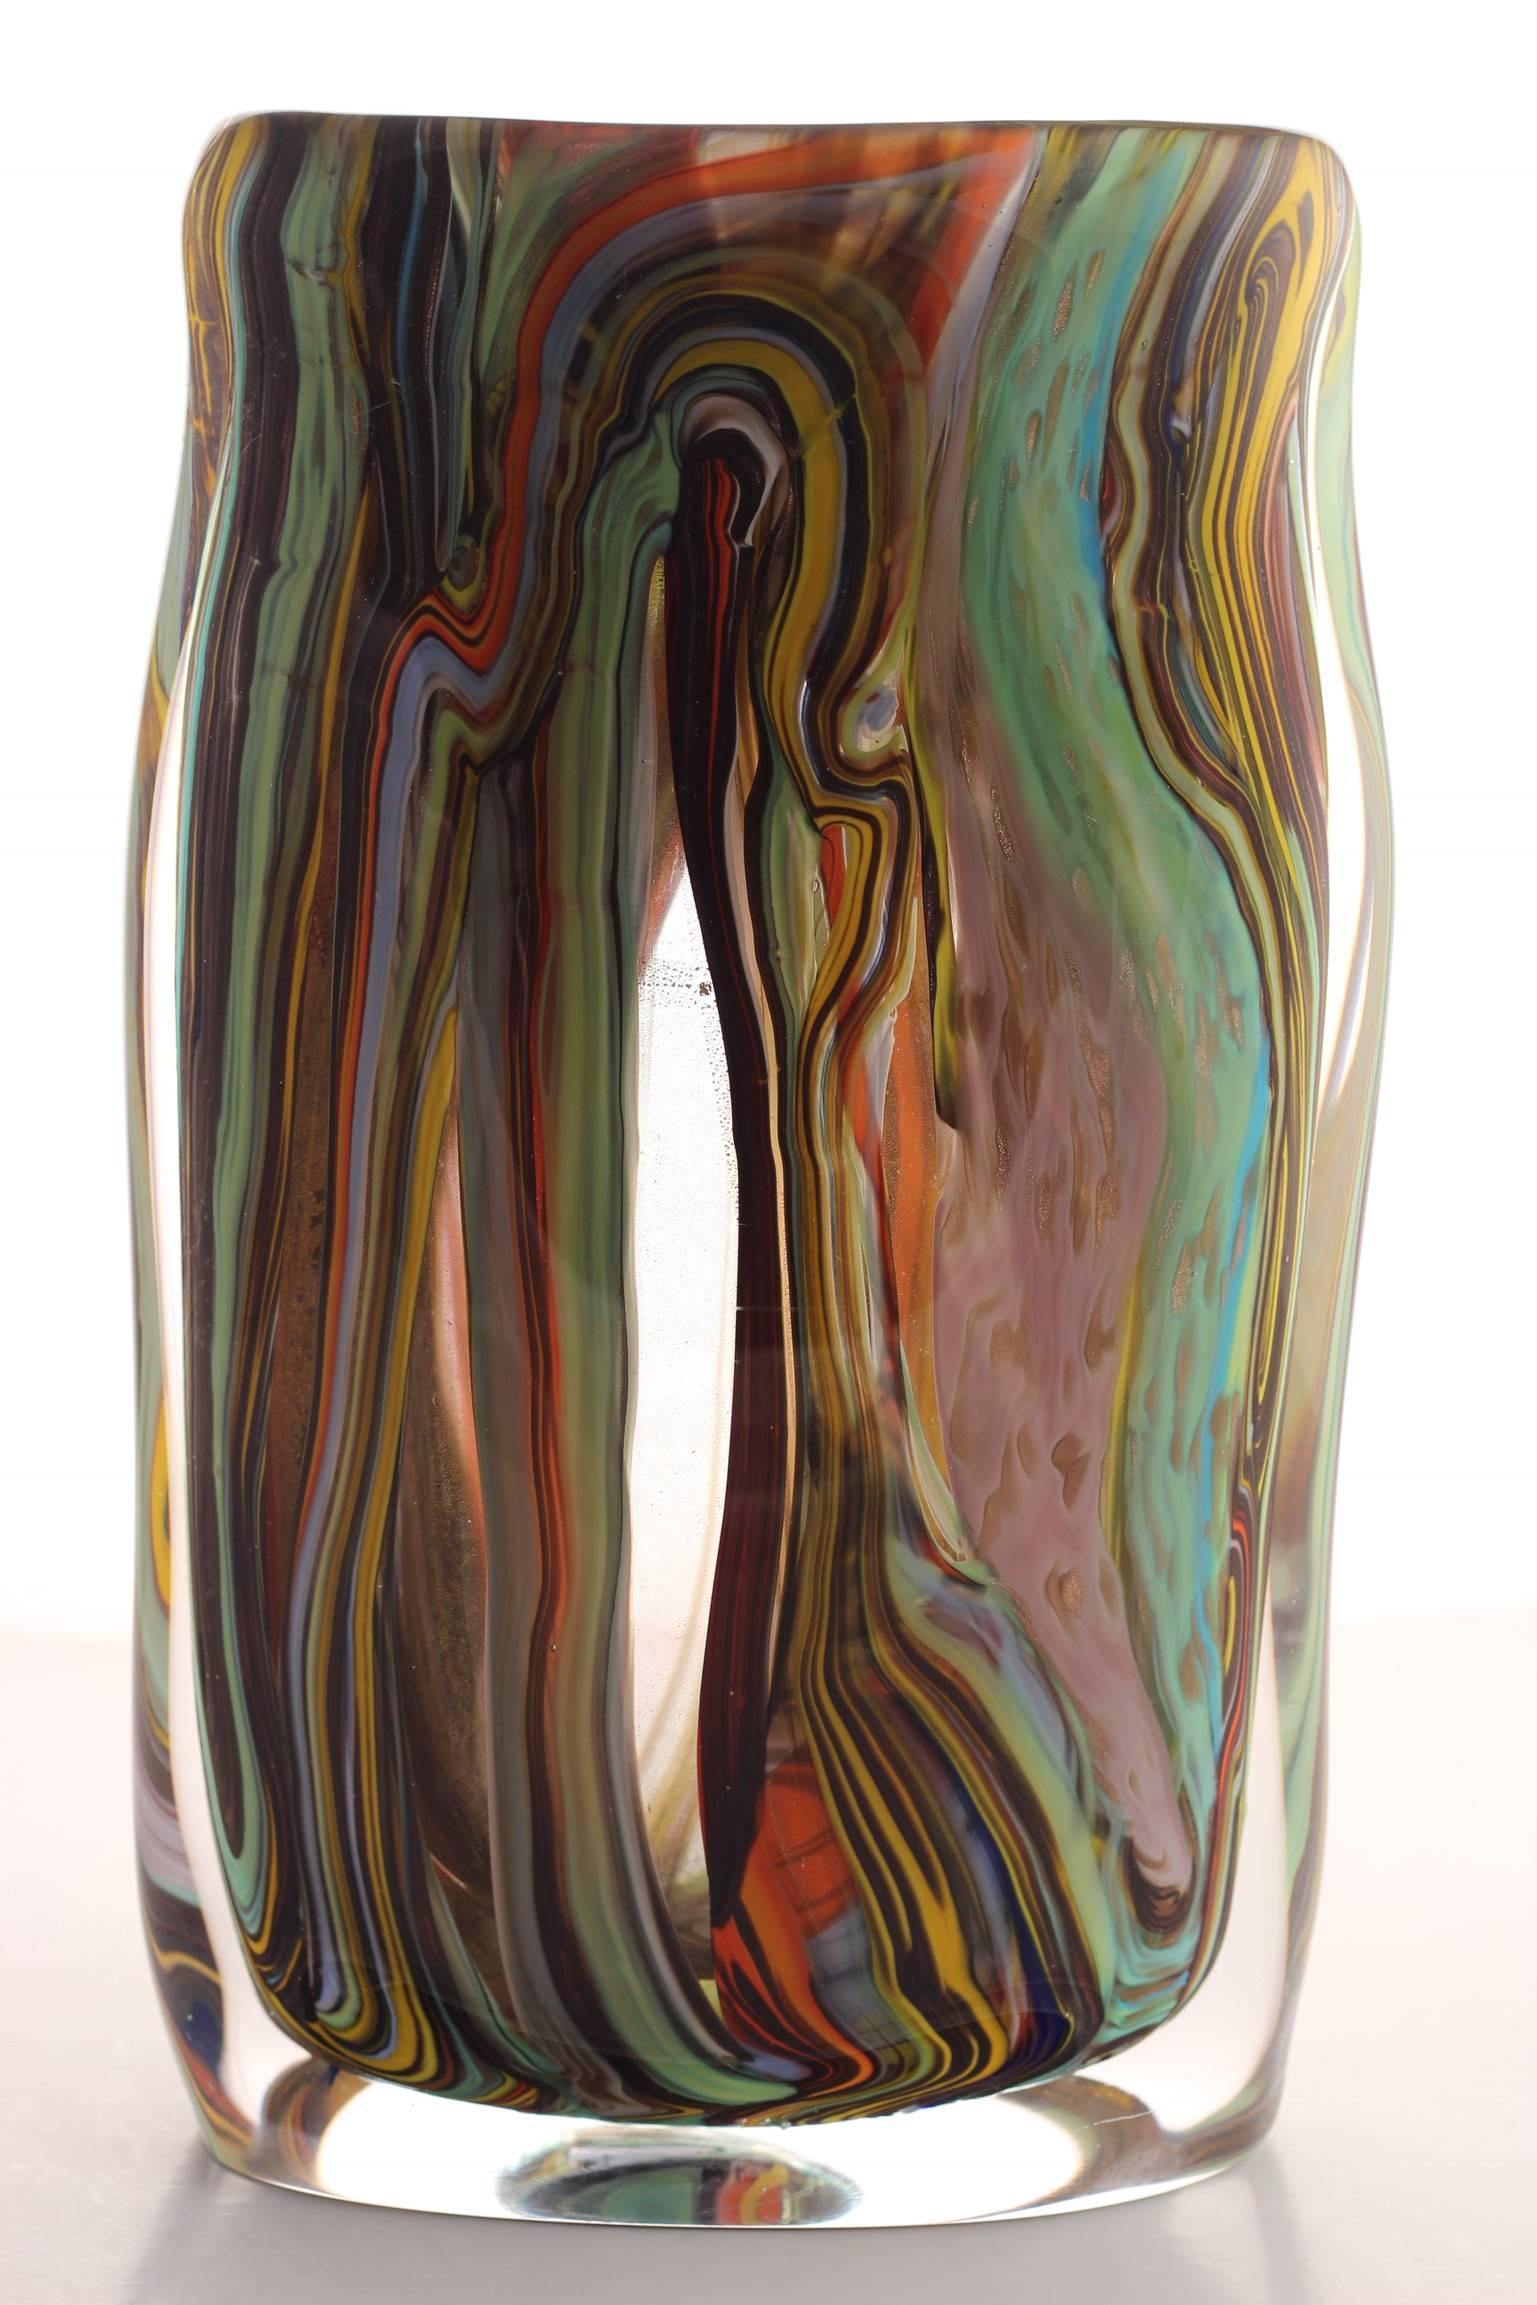 Late 20th Century Murano Vase Signed Colored and Gold Vase by Giuliano Tosi